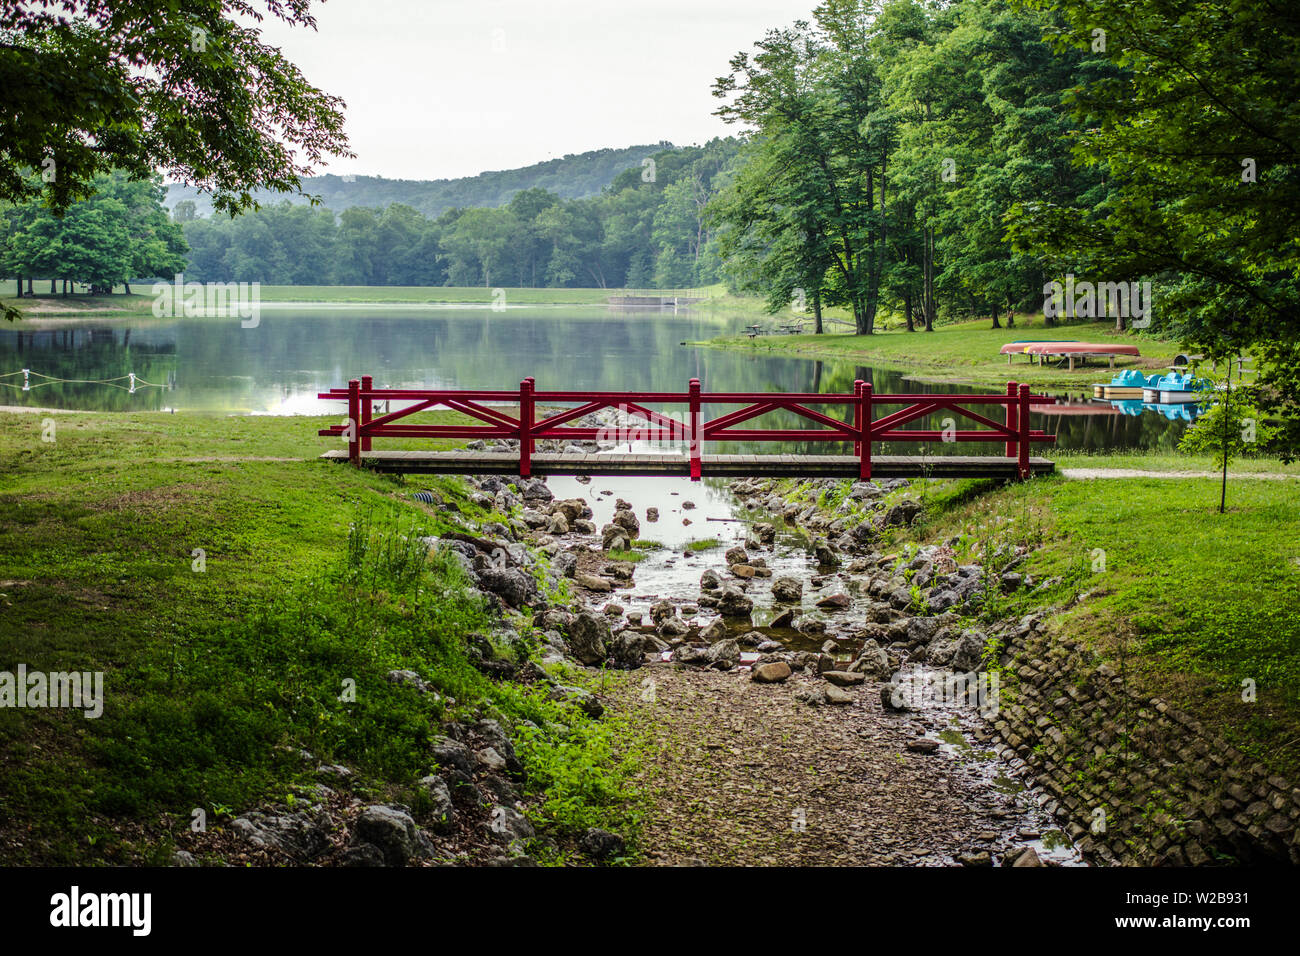 Ohio State Parks. View of lake in the Appalachian foothills at Scioto Trail State Park near Chillicothe, Ohio. Stock Photo